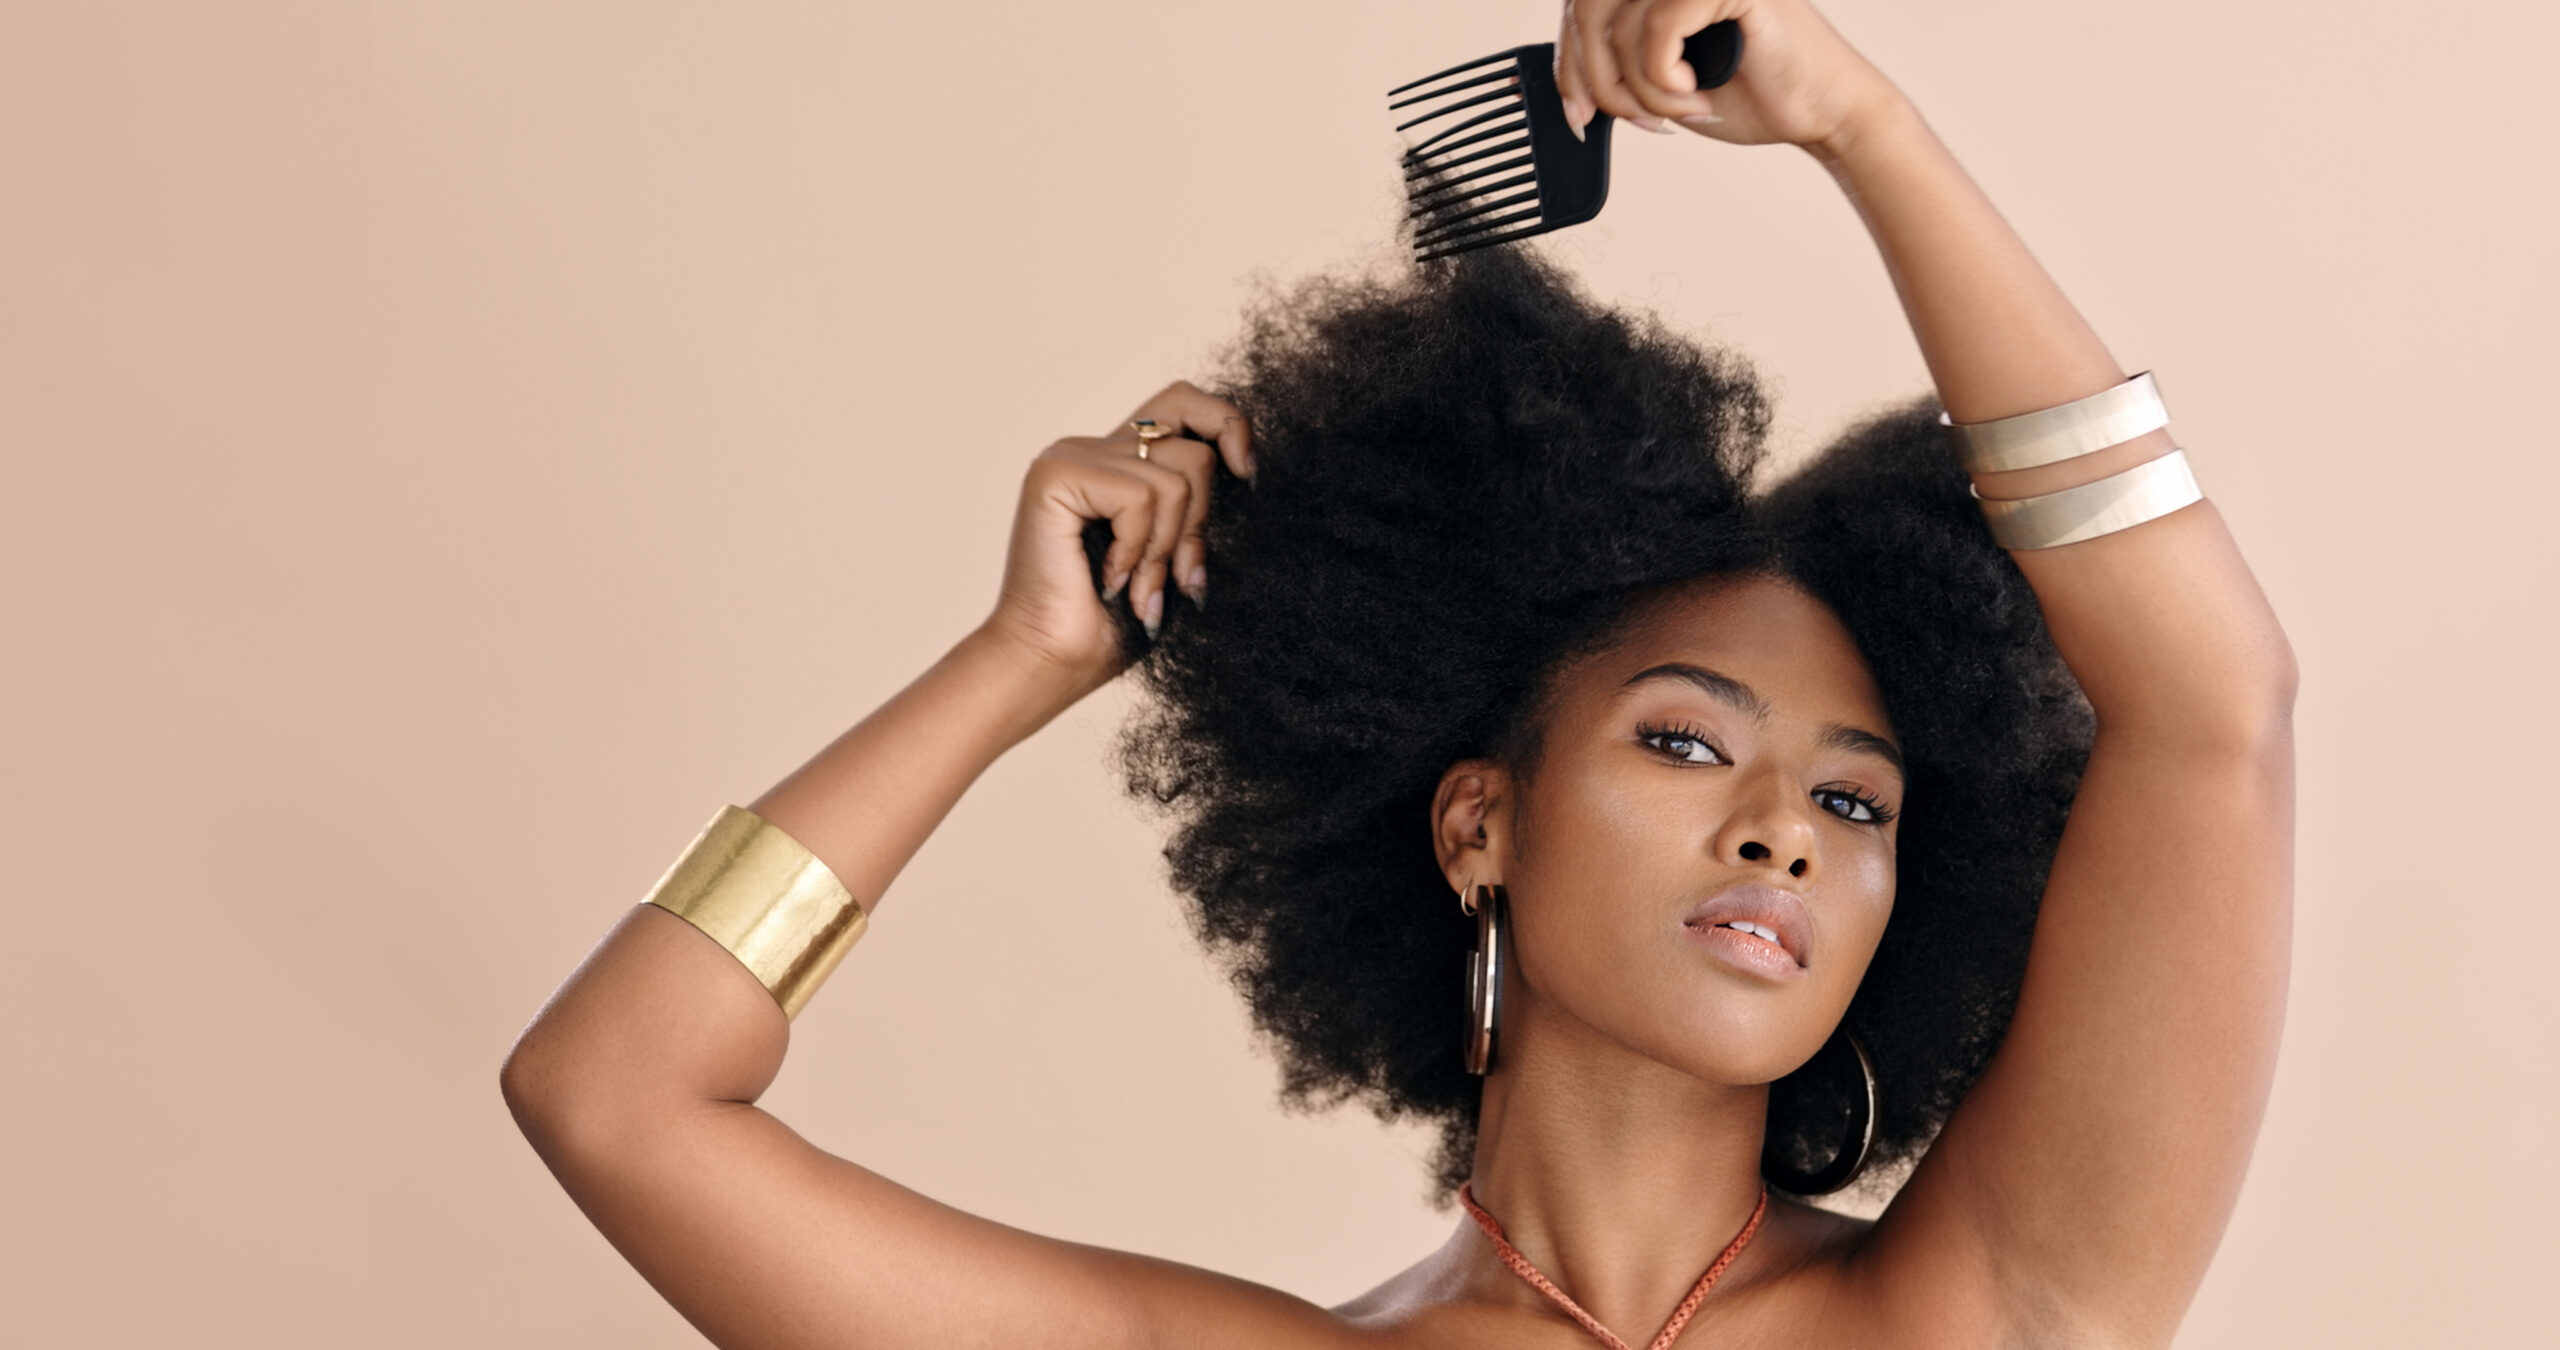 How The World Natural Hair Health And Beauty Show Has Gone Strong For Over 24 Years Via This Entrepreneur